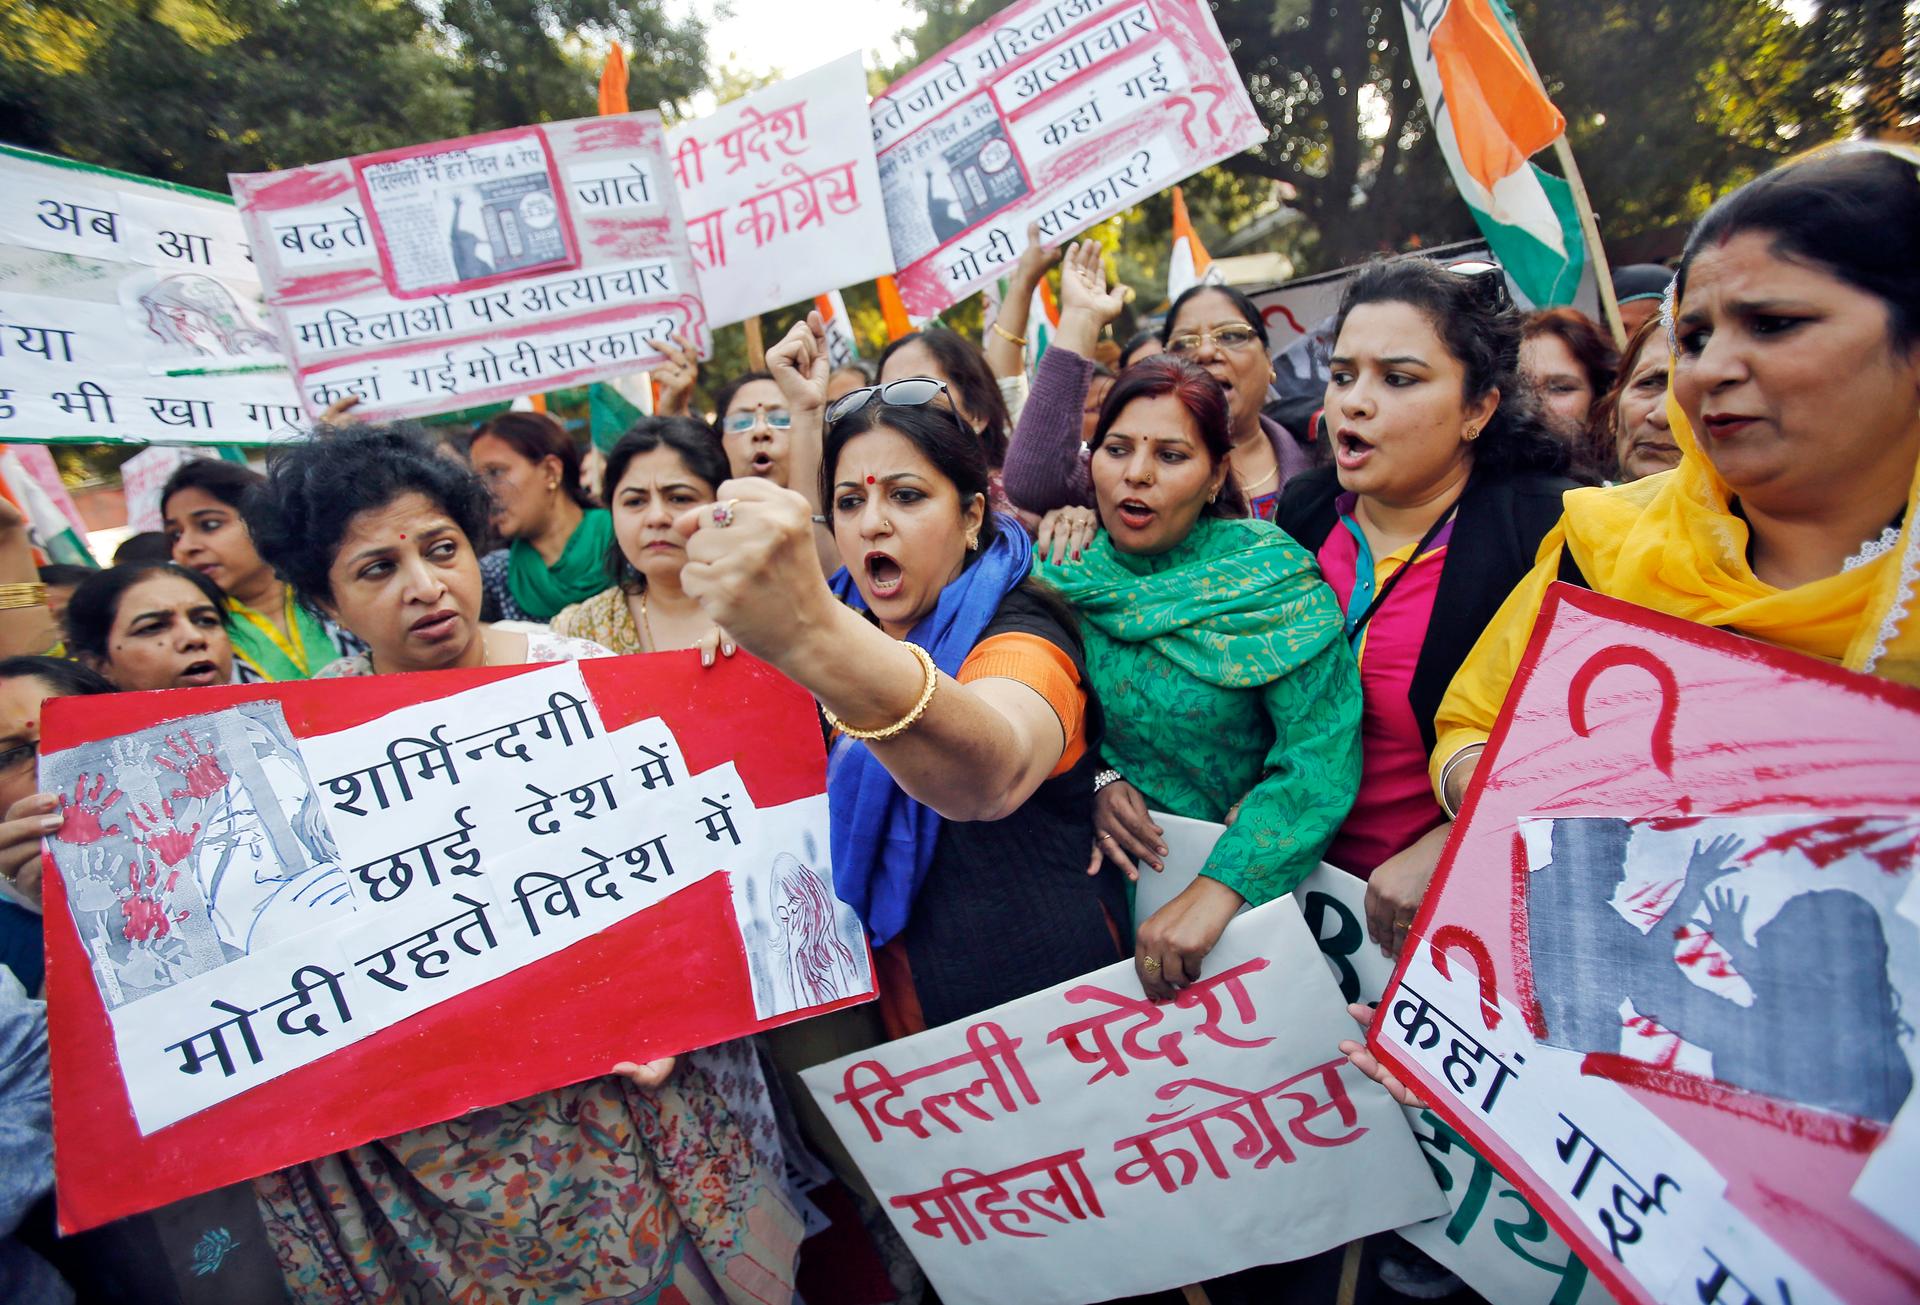 Members of the All India Mahila Congress, the women's wing of the Congress {arty, carry placards that read, "The country is covered in shame..."  The women were protesting the rape of a female passenger by an Uber taxi driver in New Delhi.